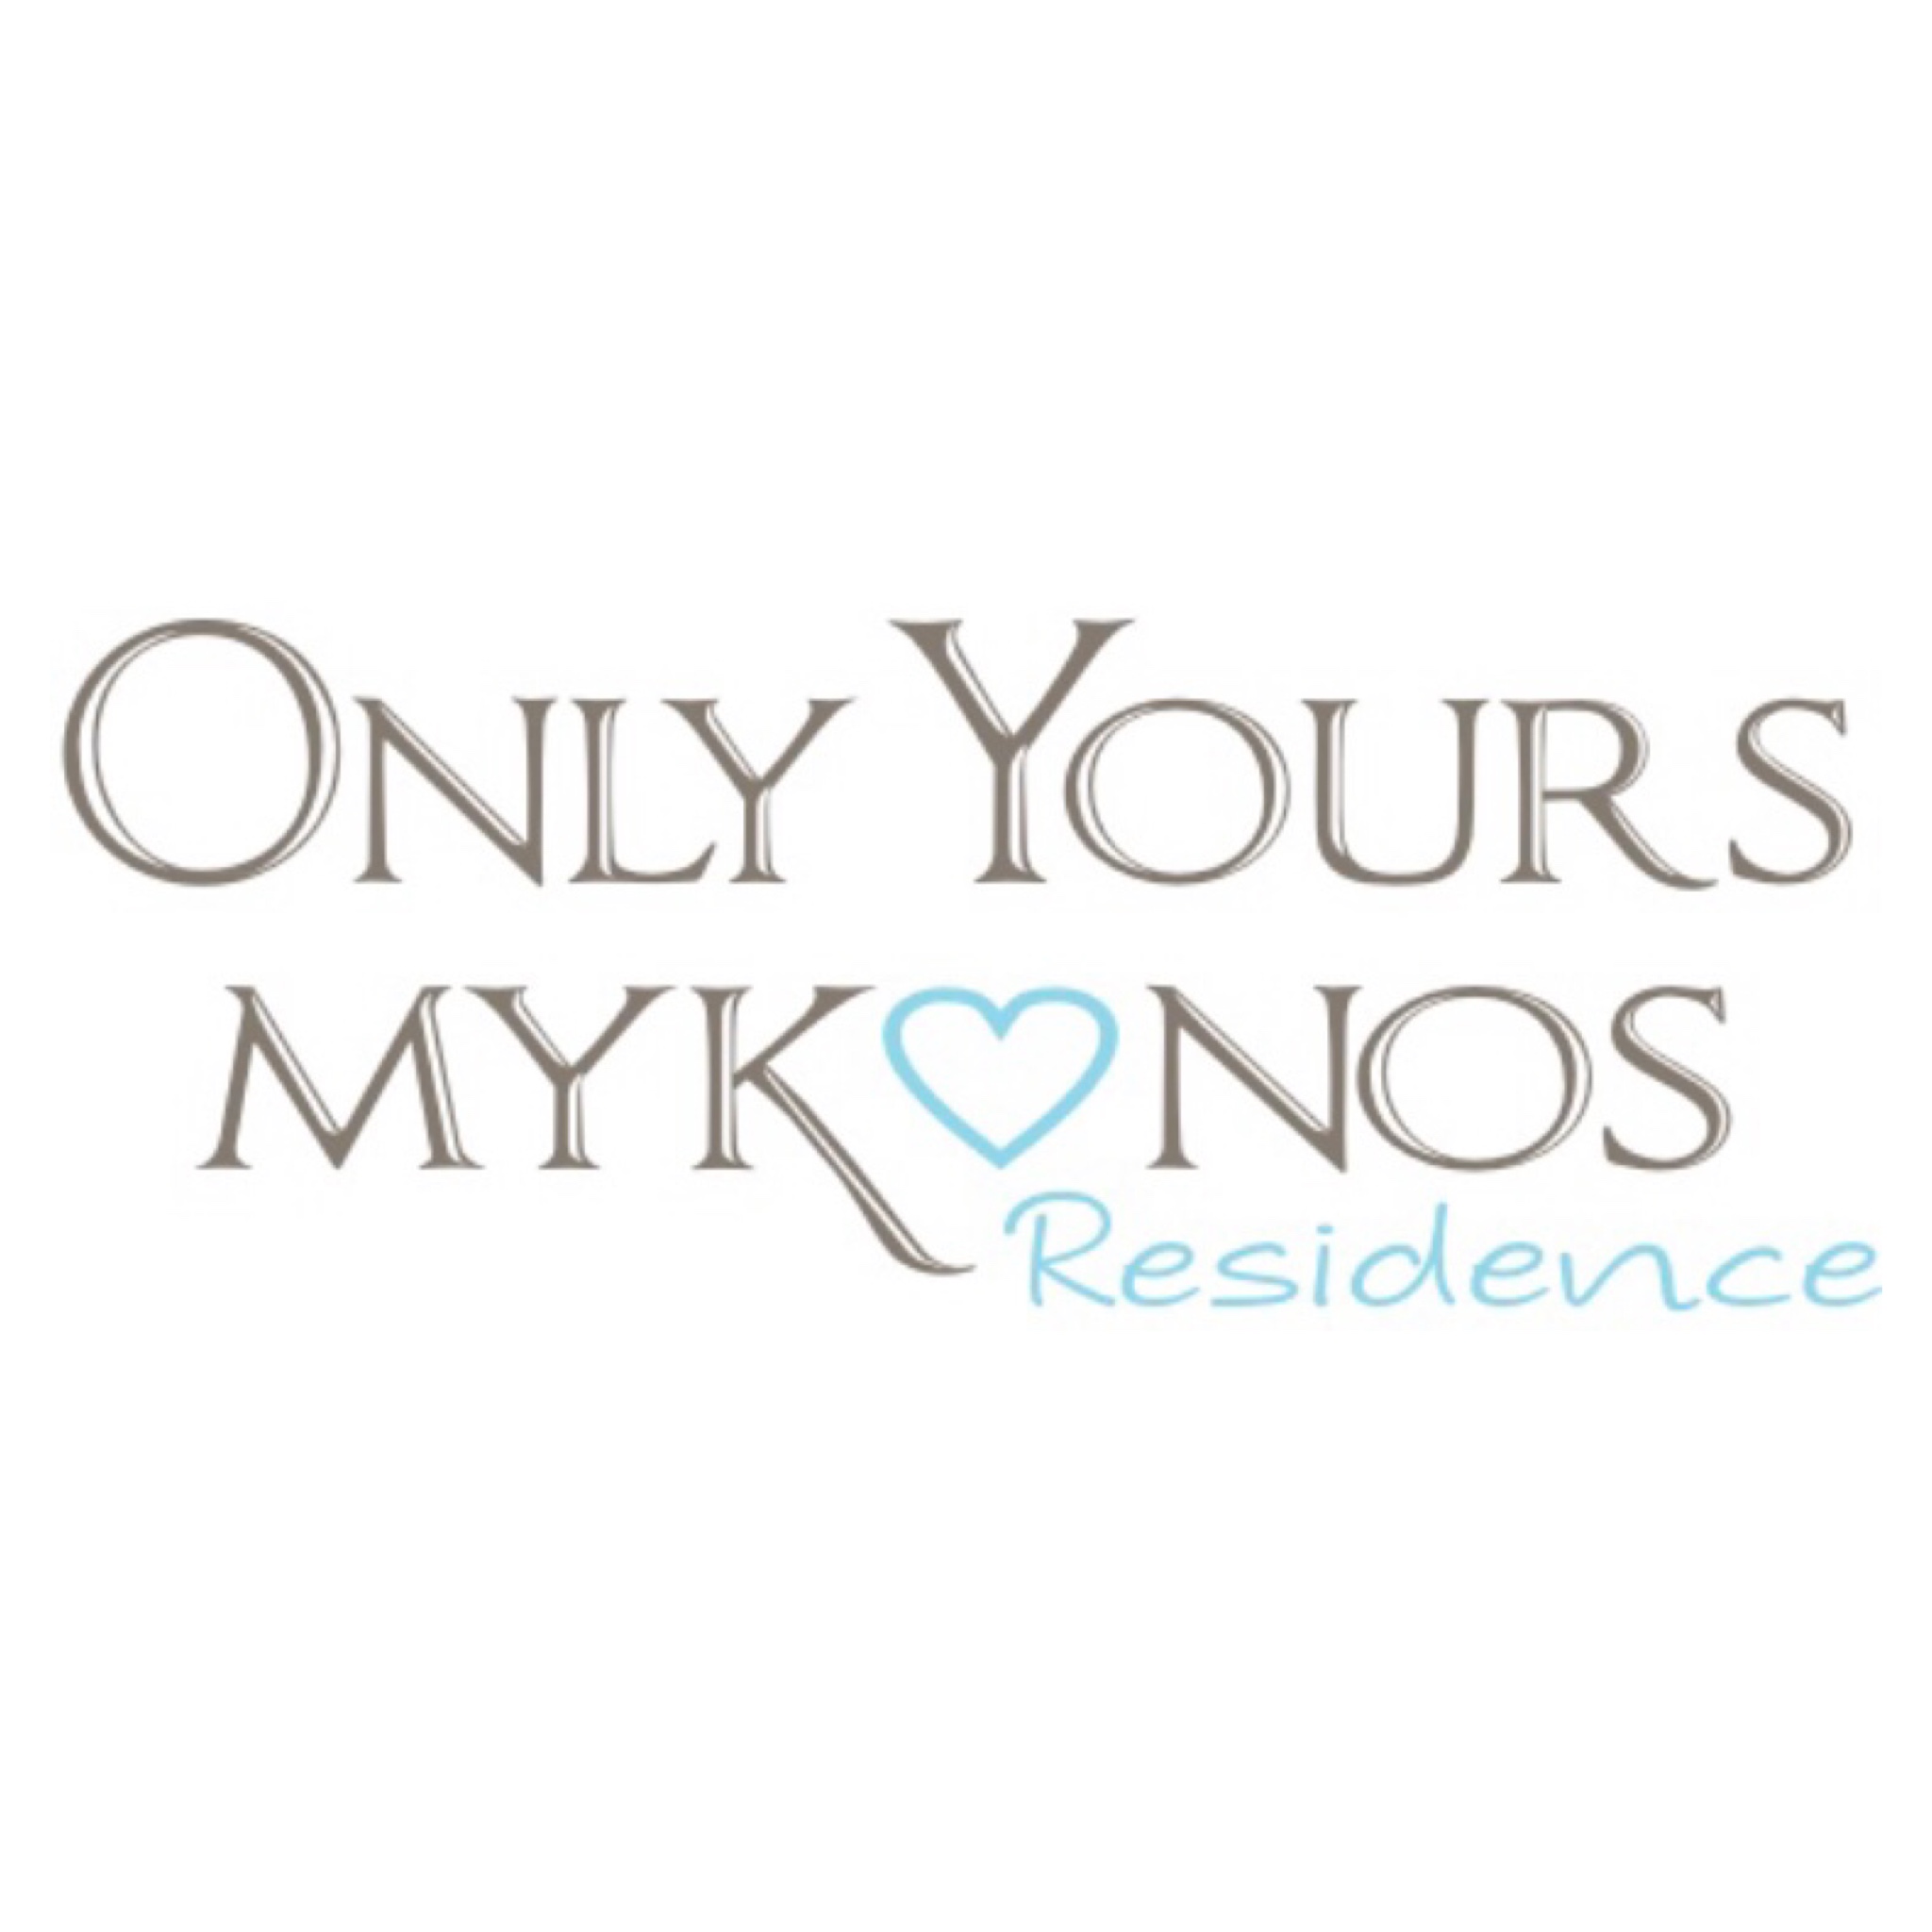 Only yours mykonos